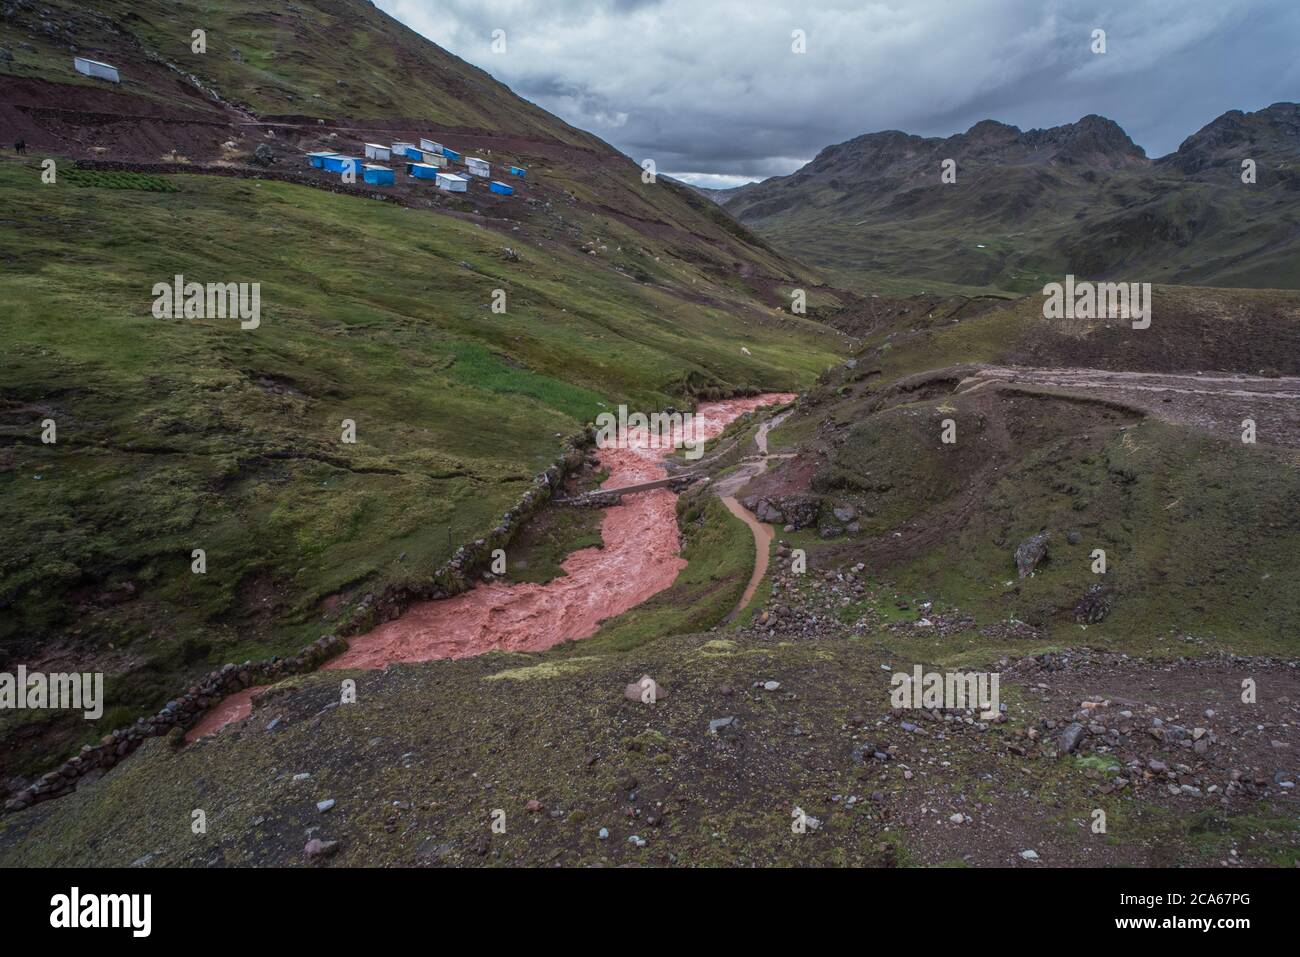 Hasty construction of the road to rainbow mountain in Peru leads to formerly clean rivers choked with sediment and runoff from erosion. Stock Photo